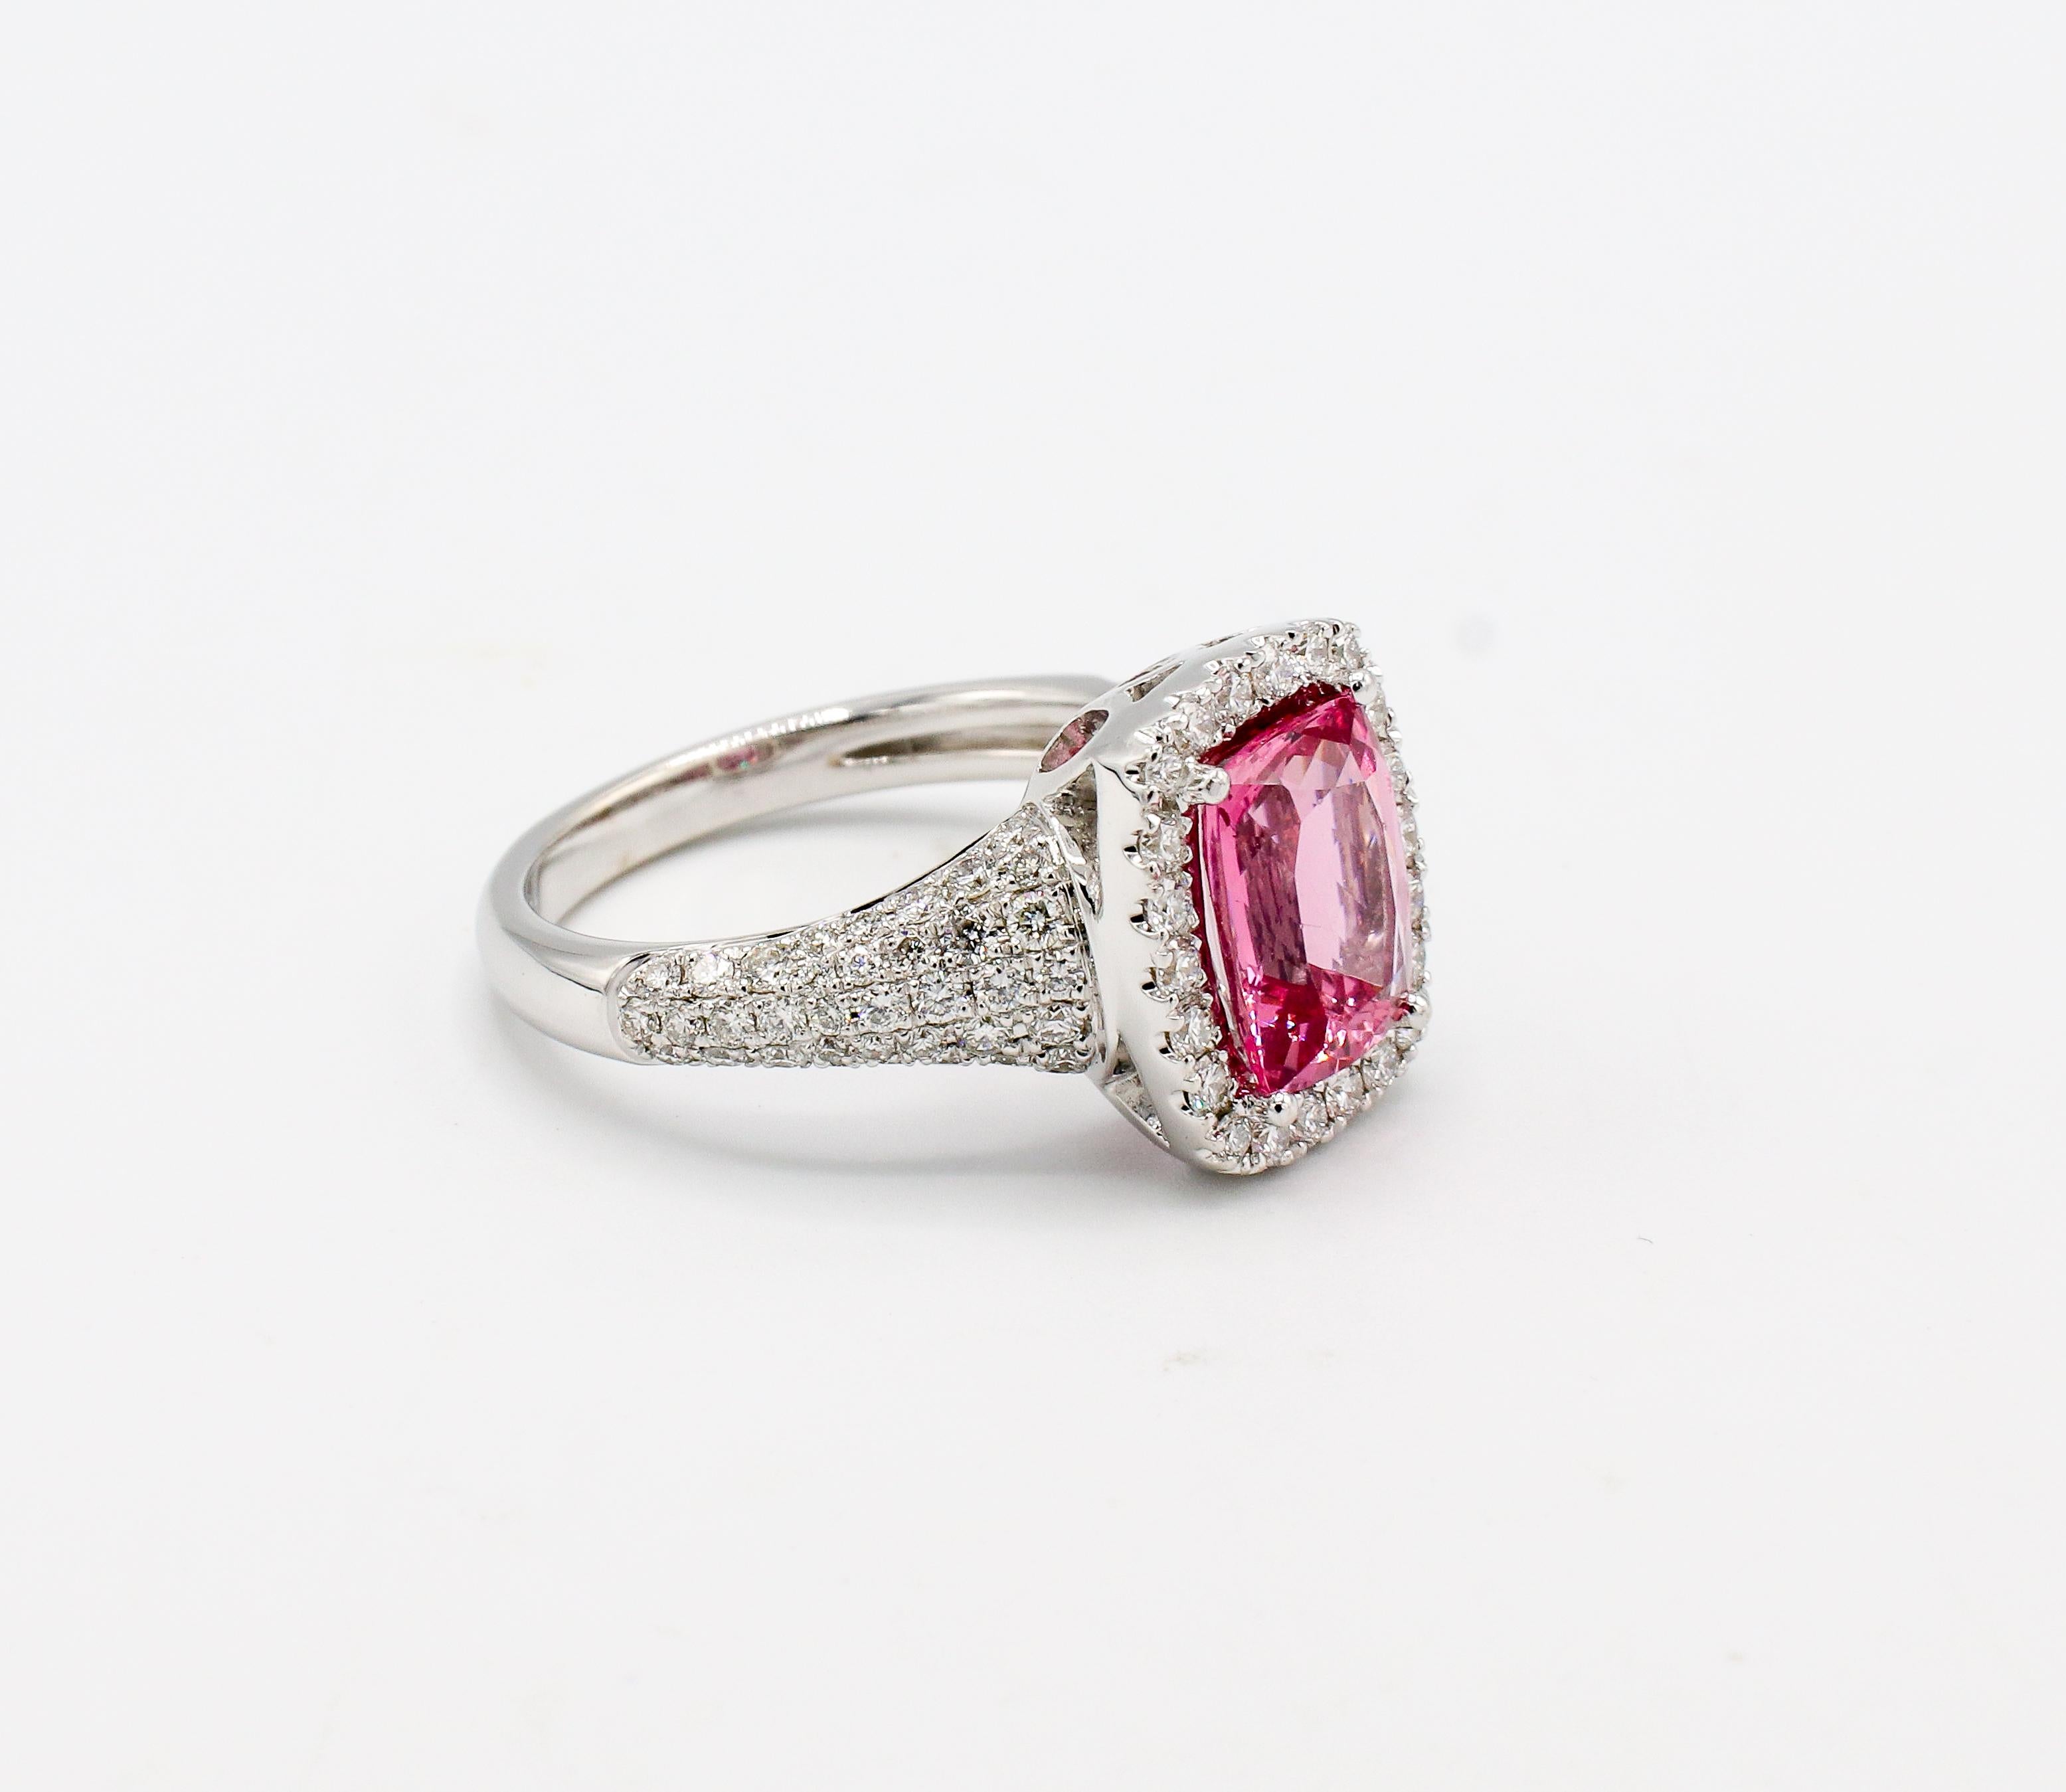 18 Karat White Gold Pink Spinel & Pave Natural Diamond Halo Cocktail Ring 
Metal: 18k white gold
Weight: 7.13 grams
Diamonds: Approx. 1.00 CTW G VS round natural diamonds
Spinel: Approx. 2.15 carats
Top: 13 x 11mm
Height: 6.5mm
Size: 6.75 (US)
